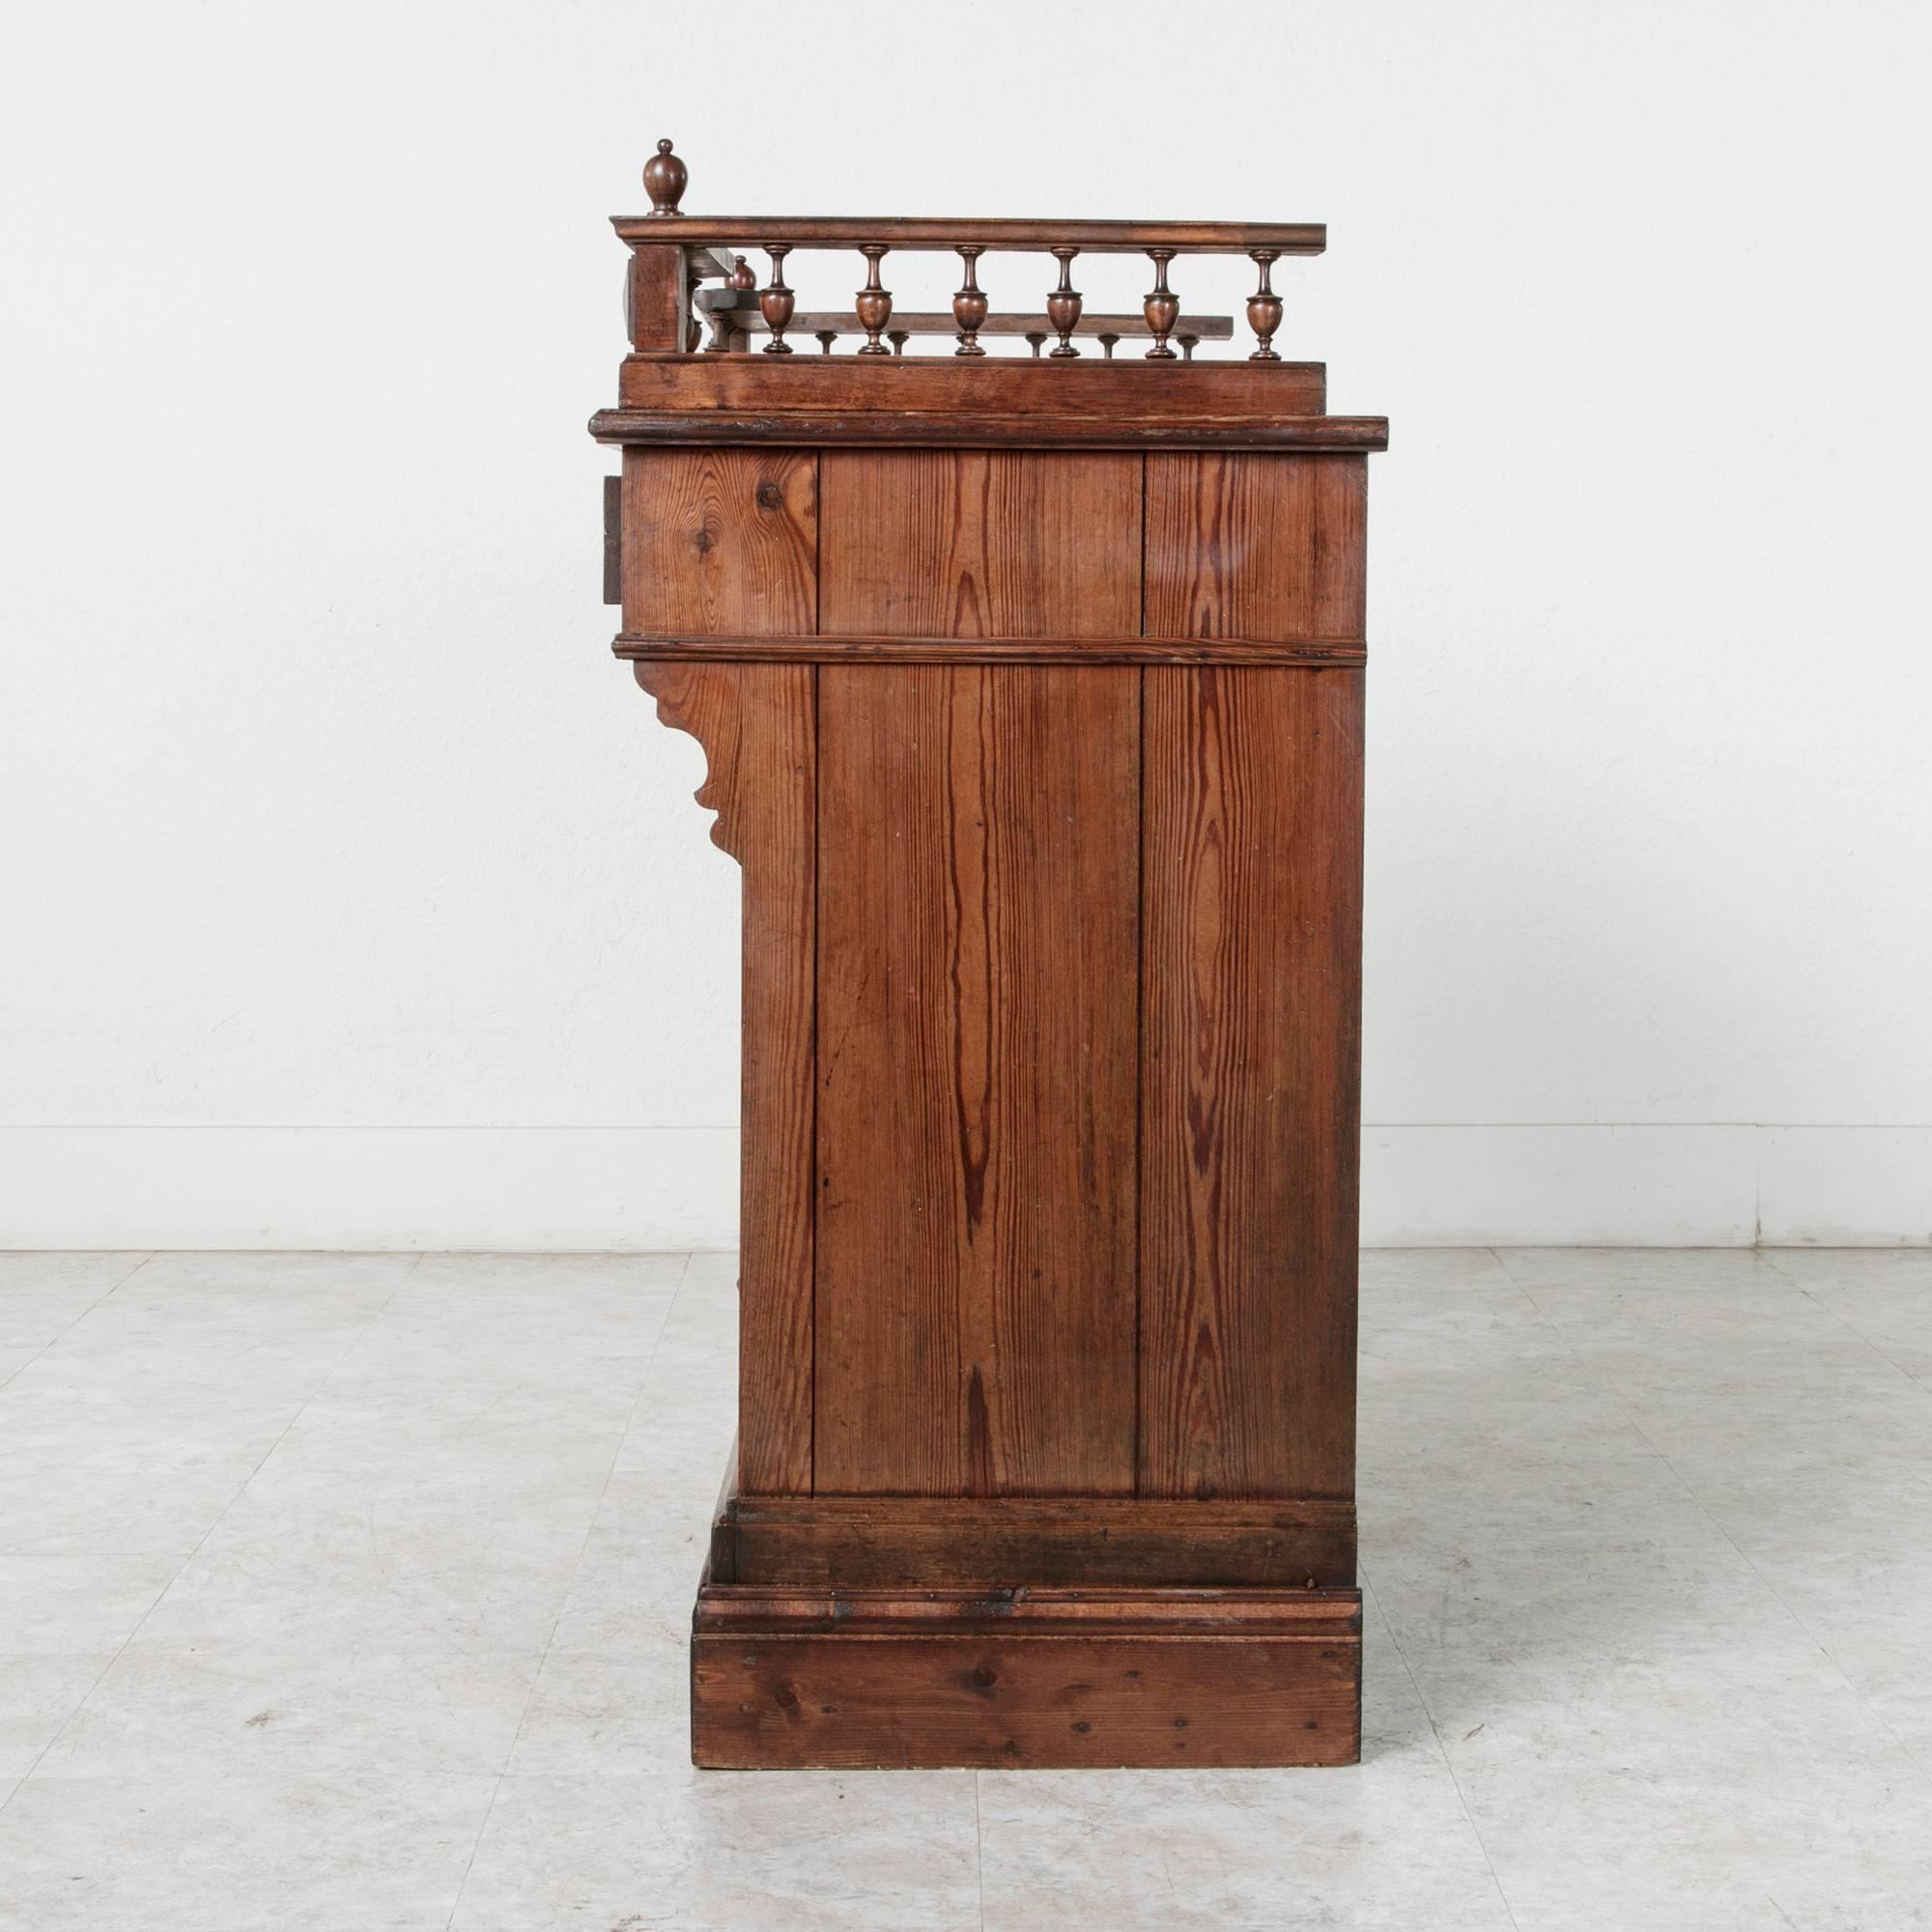 Early 20th Century French Pitch Pine Shop Counter or Dry Bar with Spooled Gallery, circa 1900